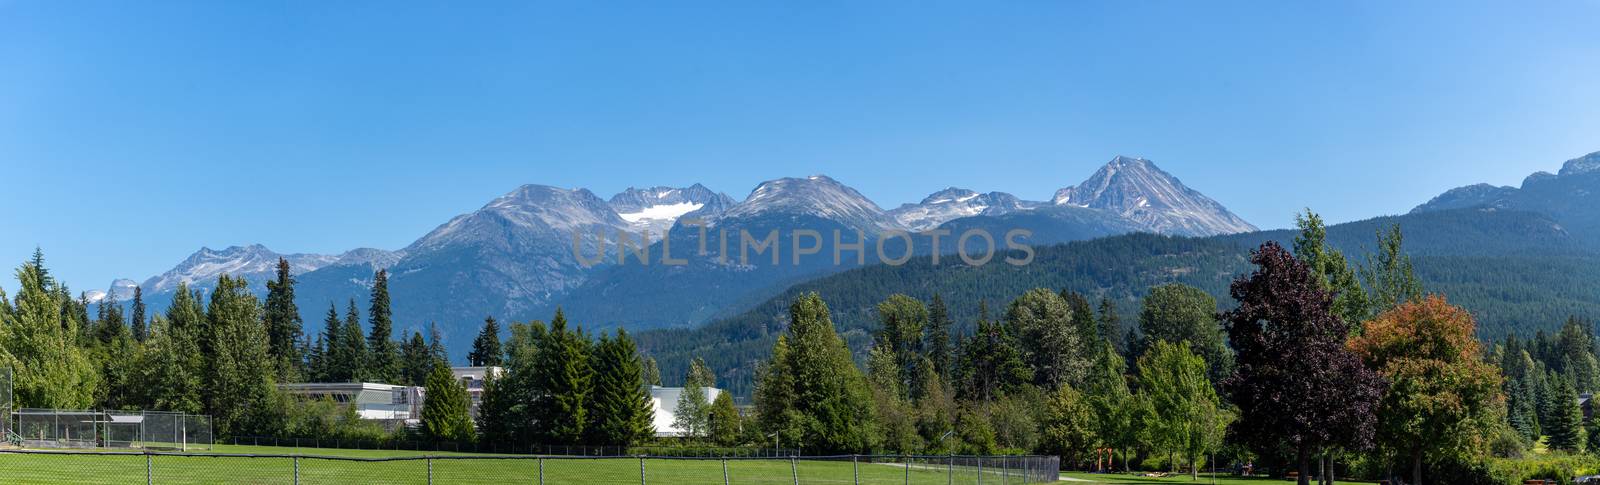 Panorama of beautiful trees and forest in Whistler/Blackcomb, We by kingmaphotos